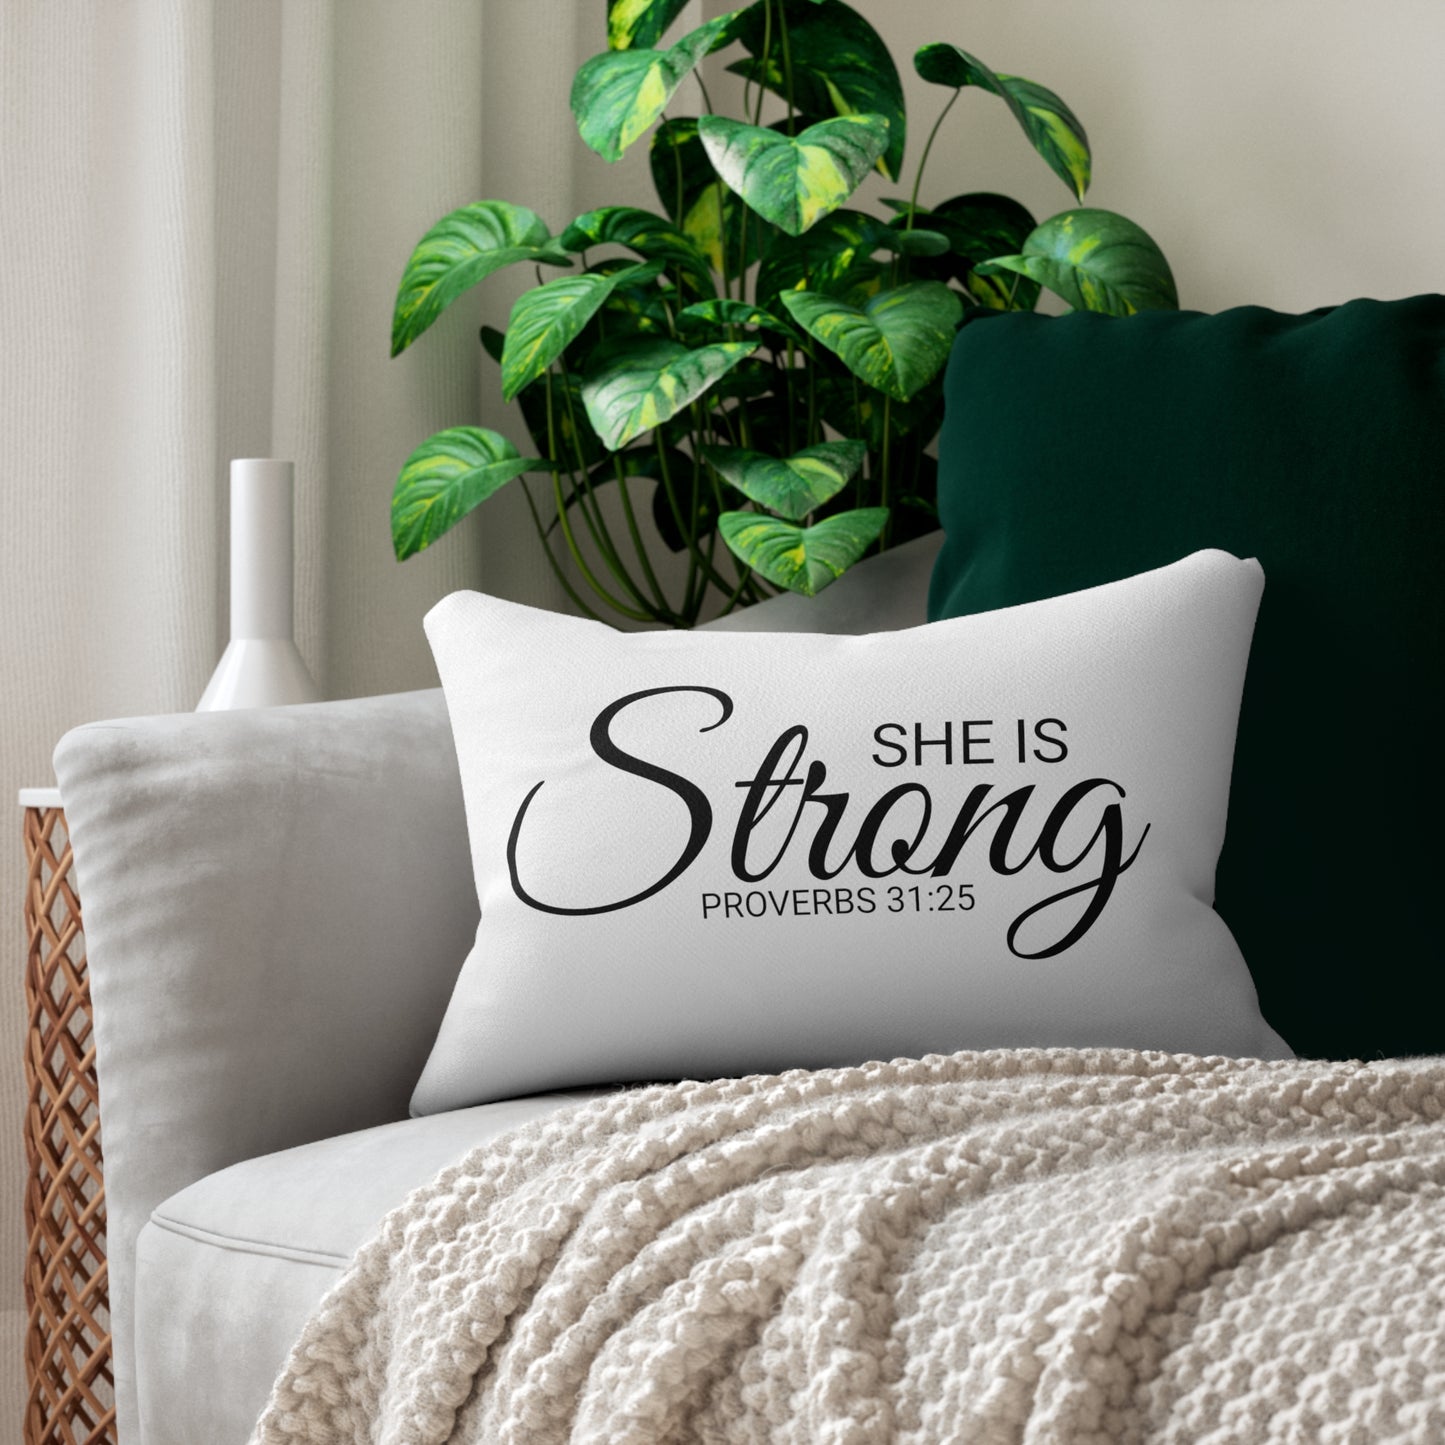 Scripture She is Strong Proverbs 31:25 Bible Verse Pillow